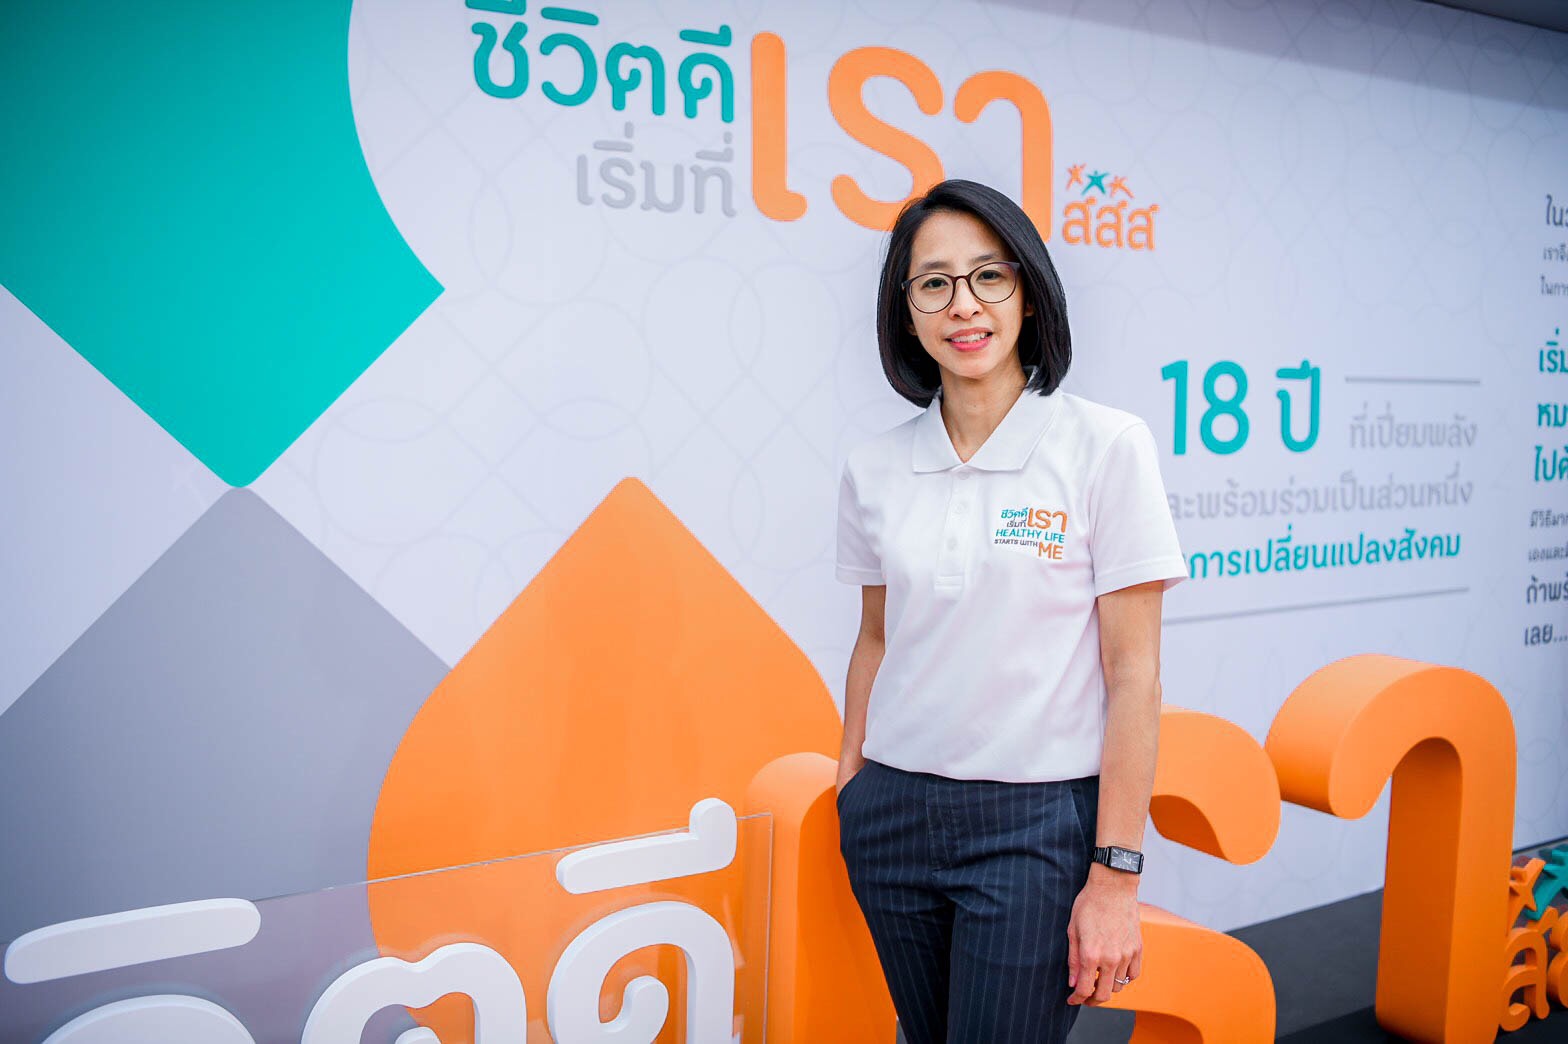 ThaiHealth pops up ideas to fight CoVid-19 through Citizen Resilience Project thaihealth